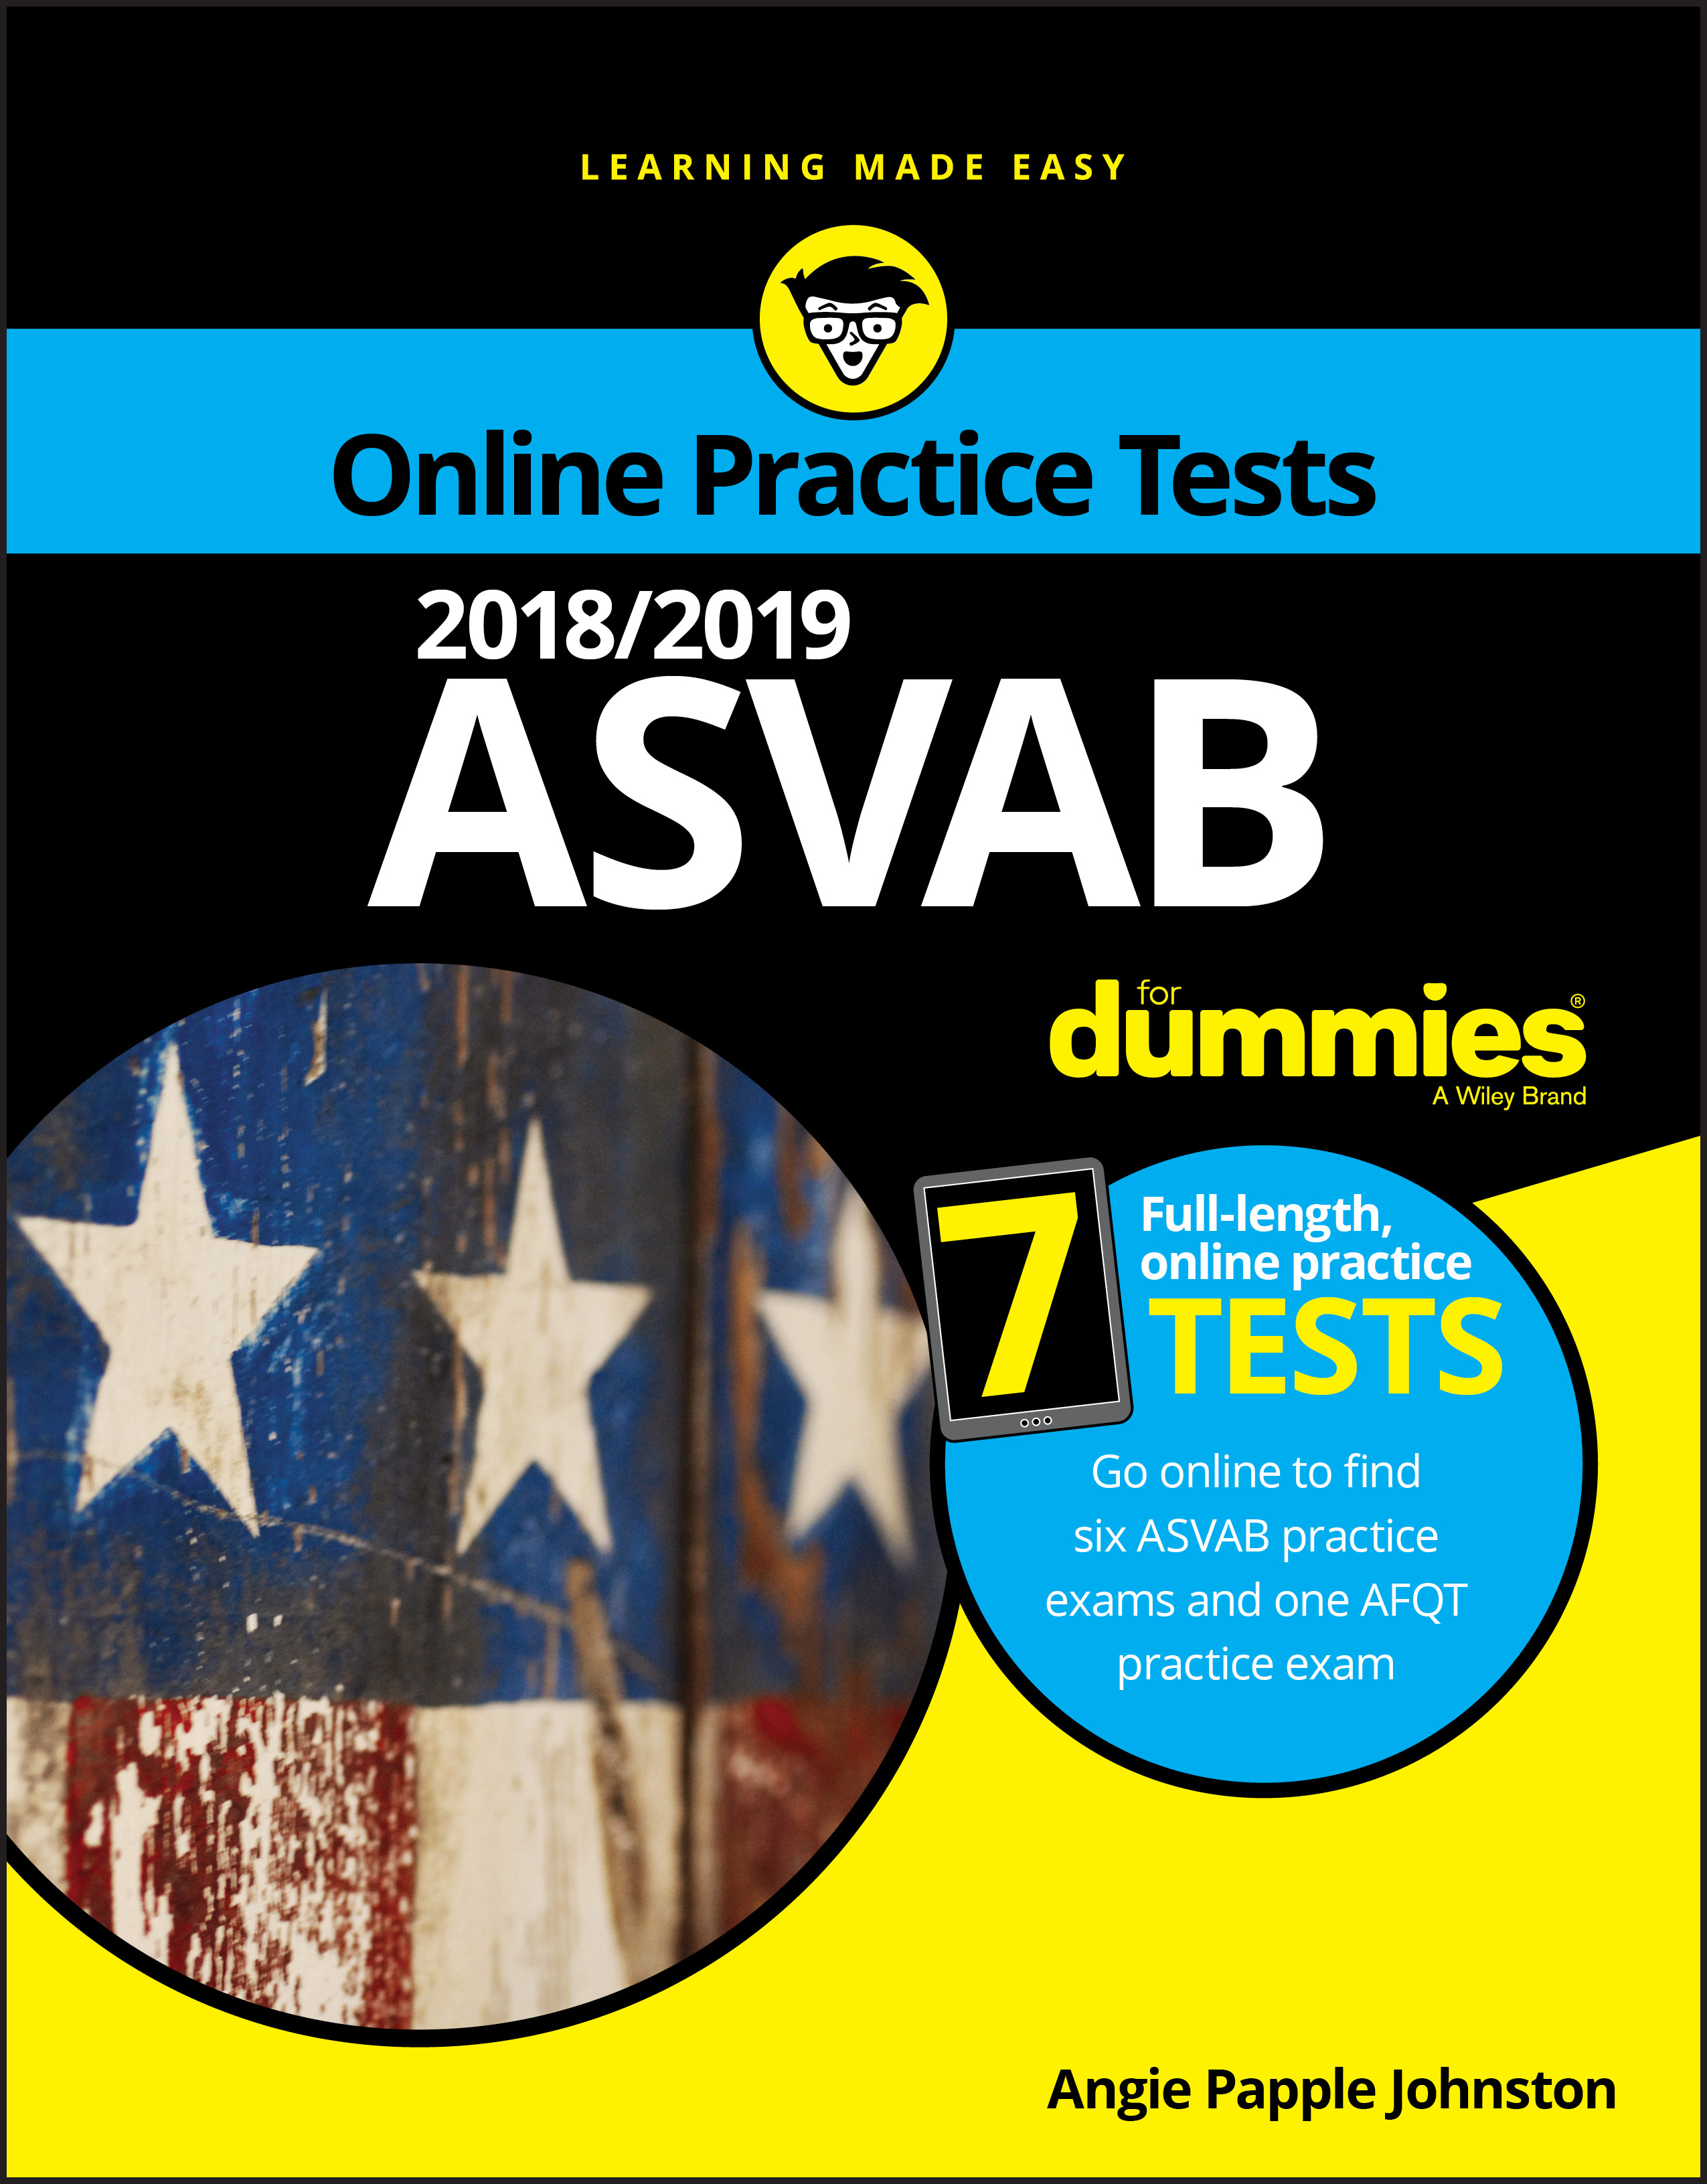 ASVAB For Dummies by Angie Papple Johnston